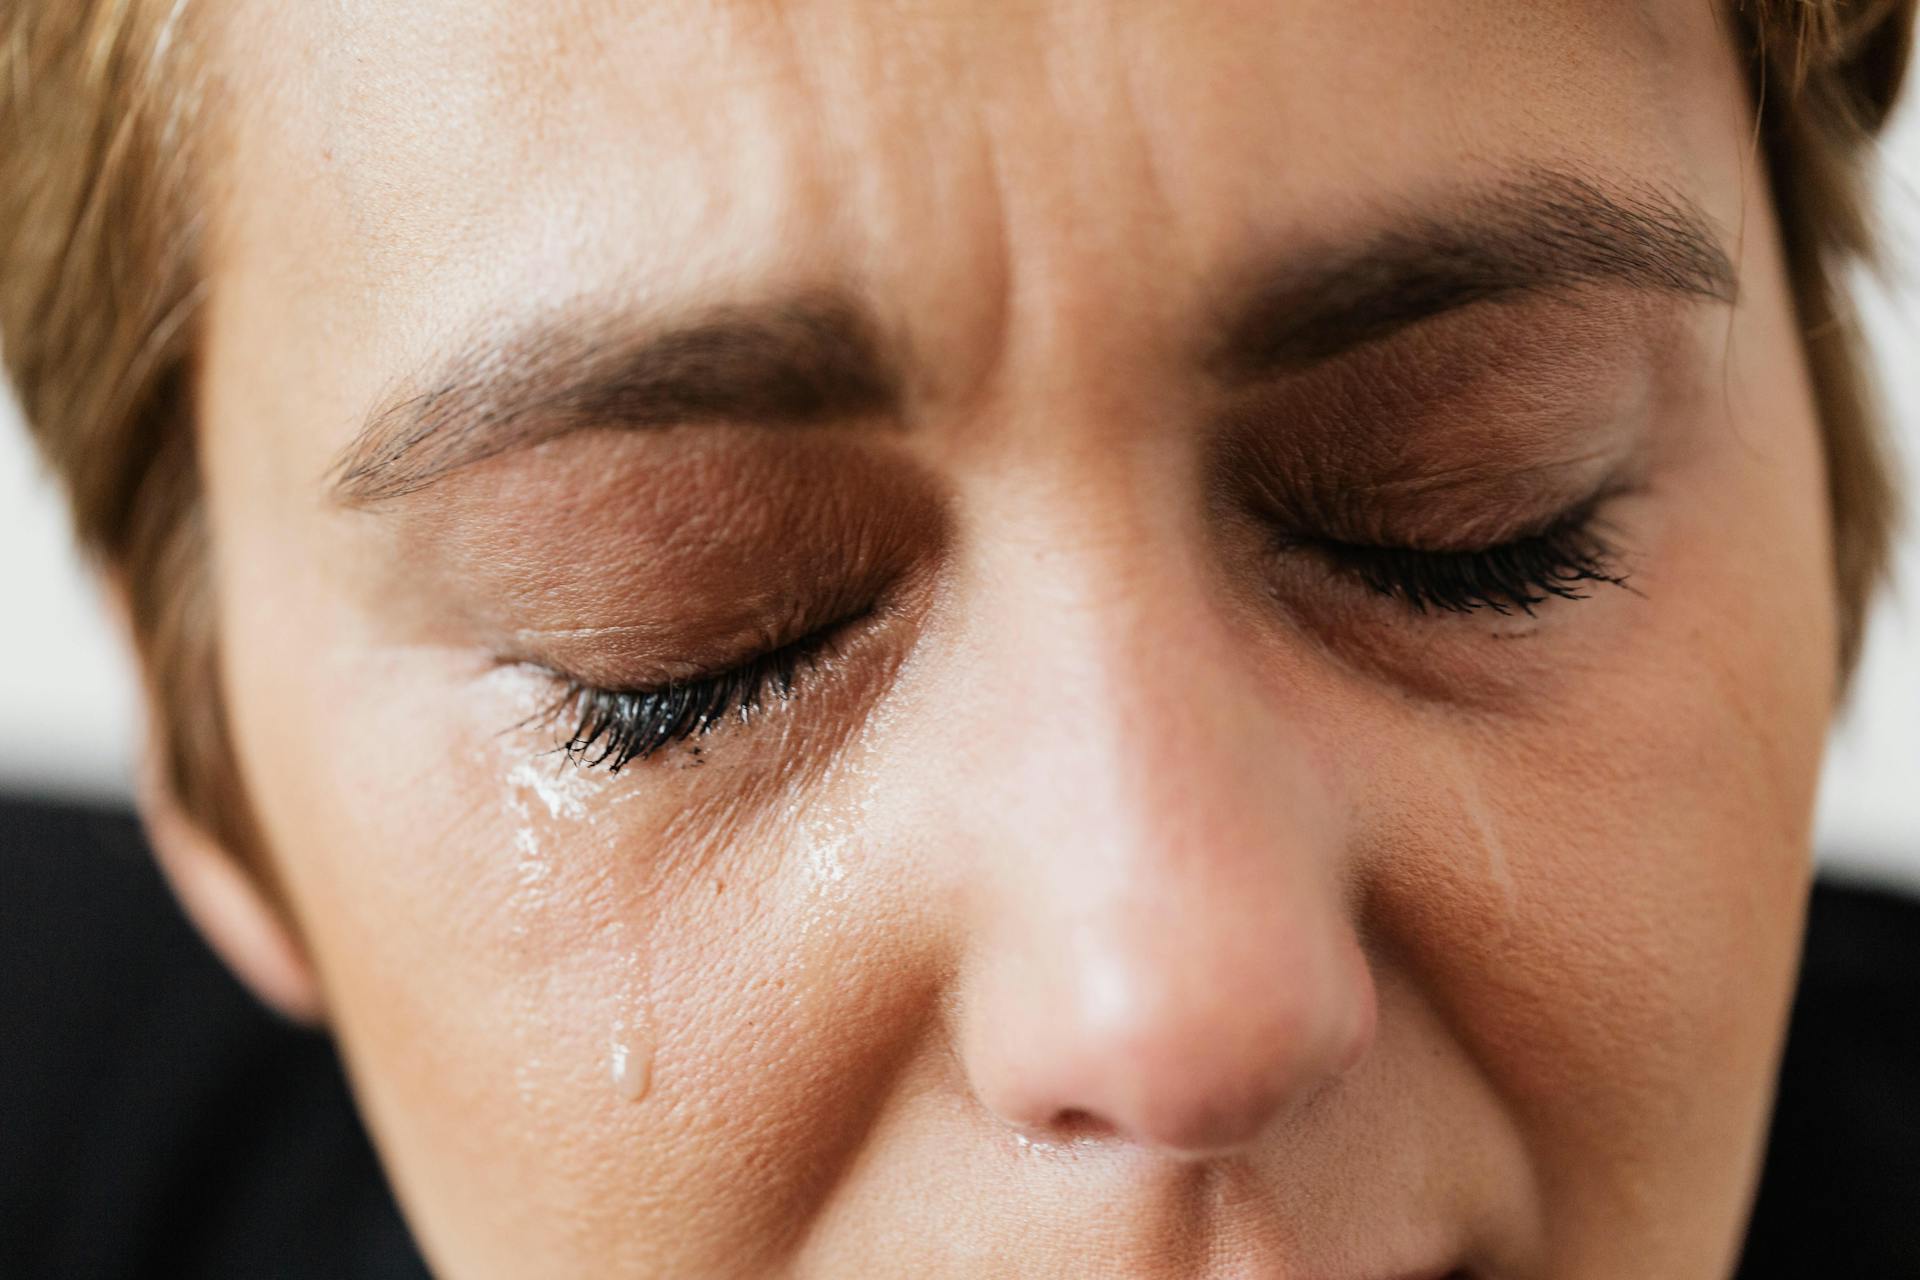 A close-up of a crying woman | Source: Pexels